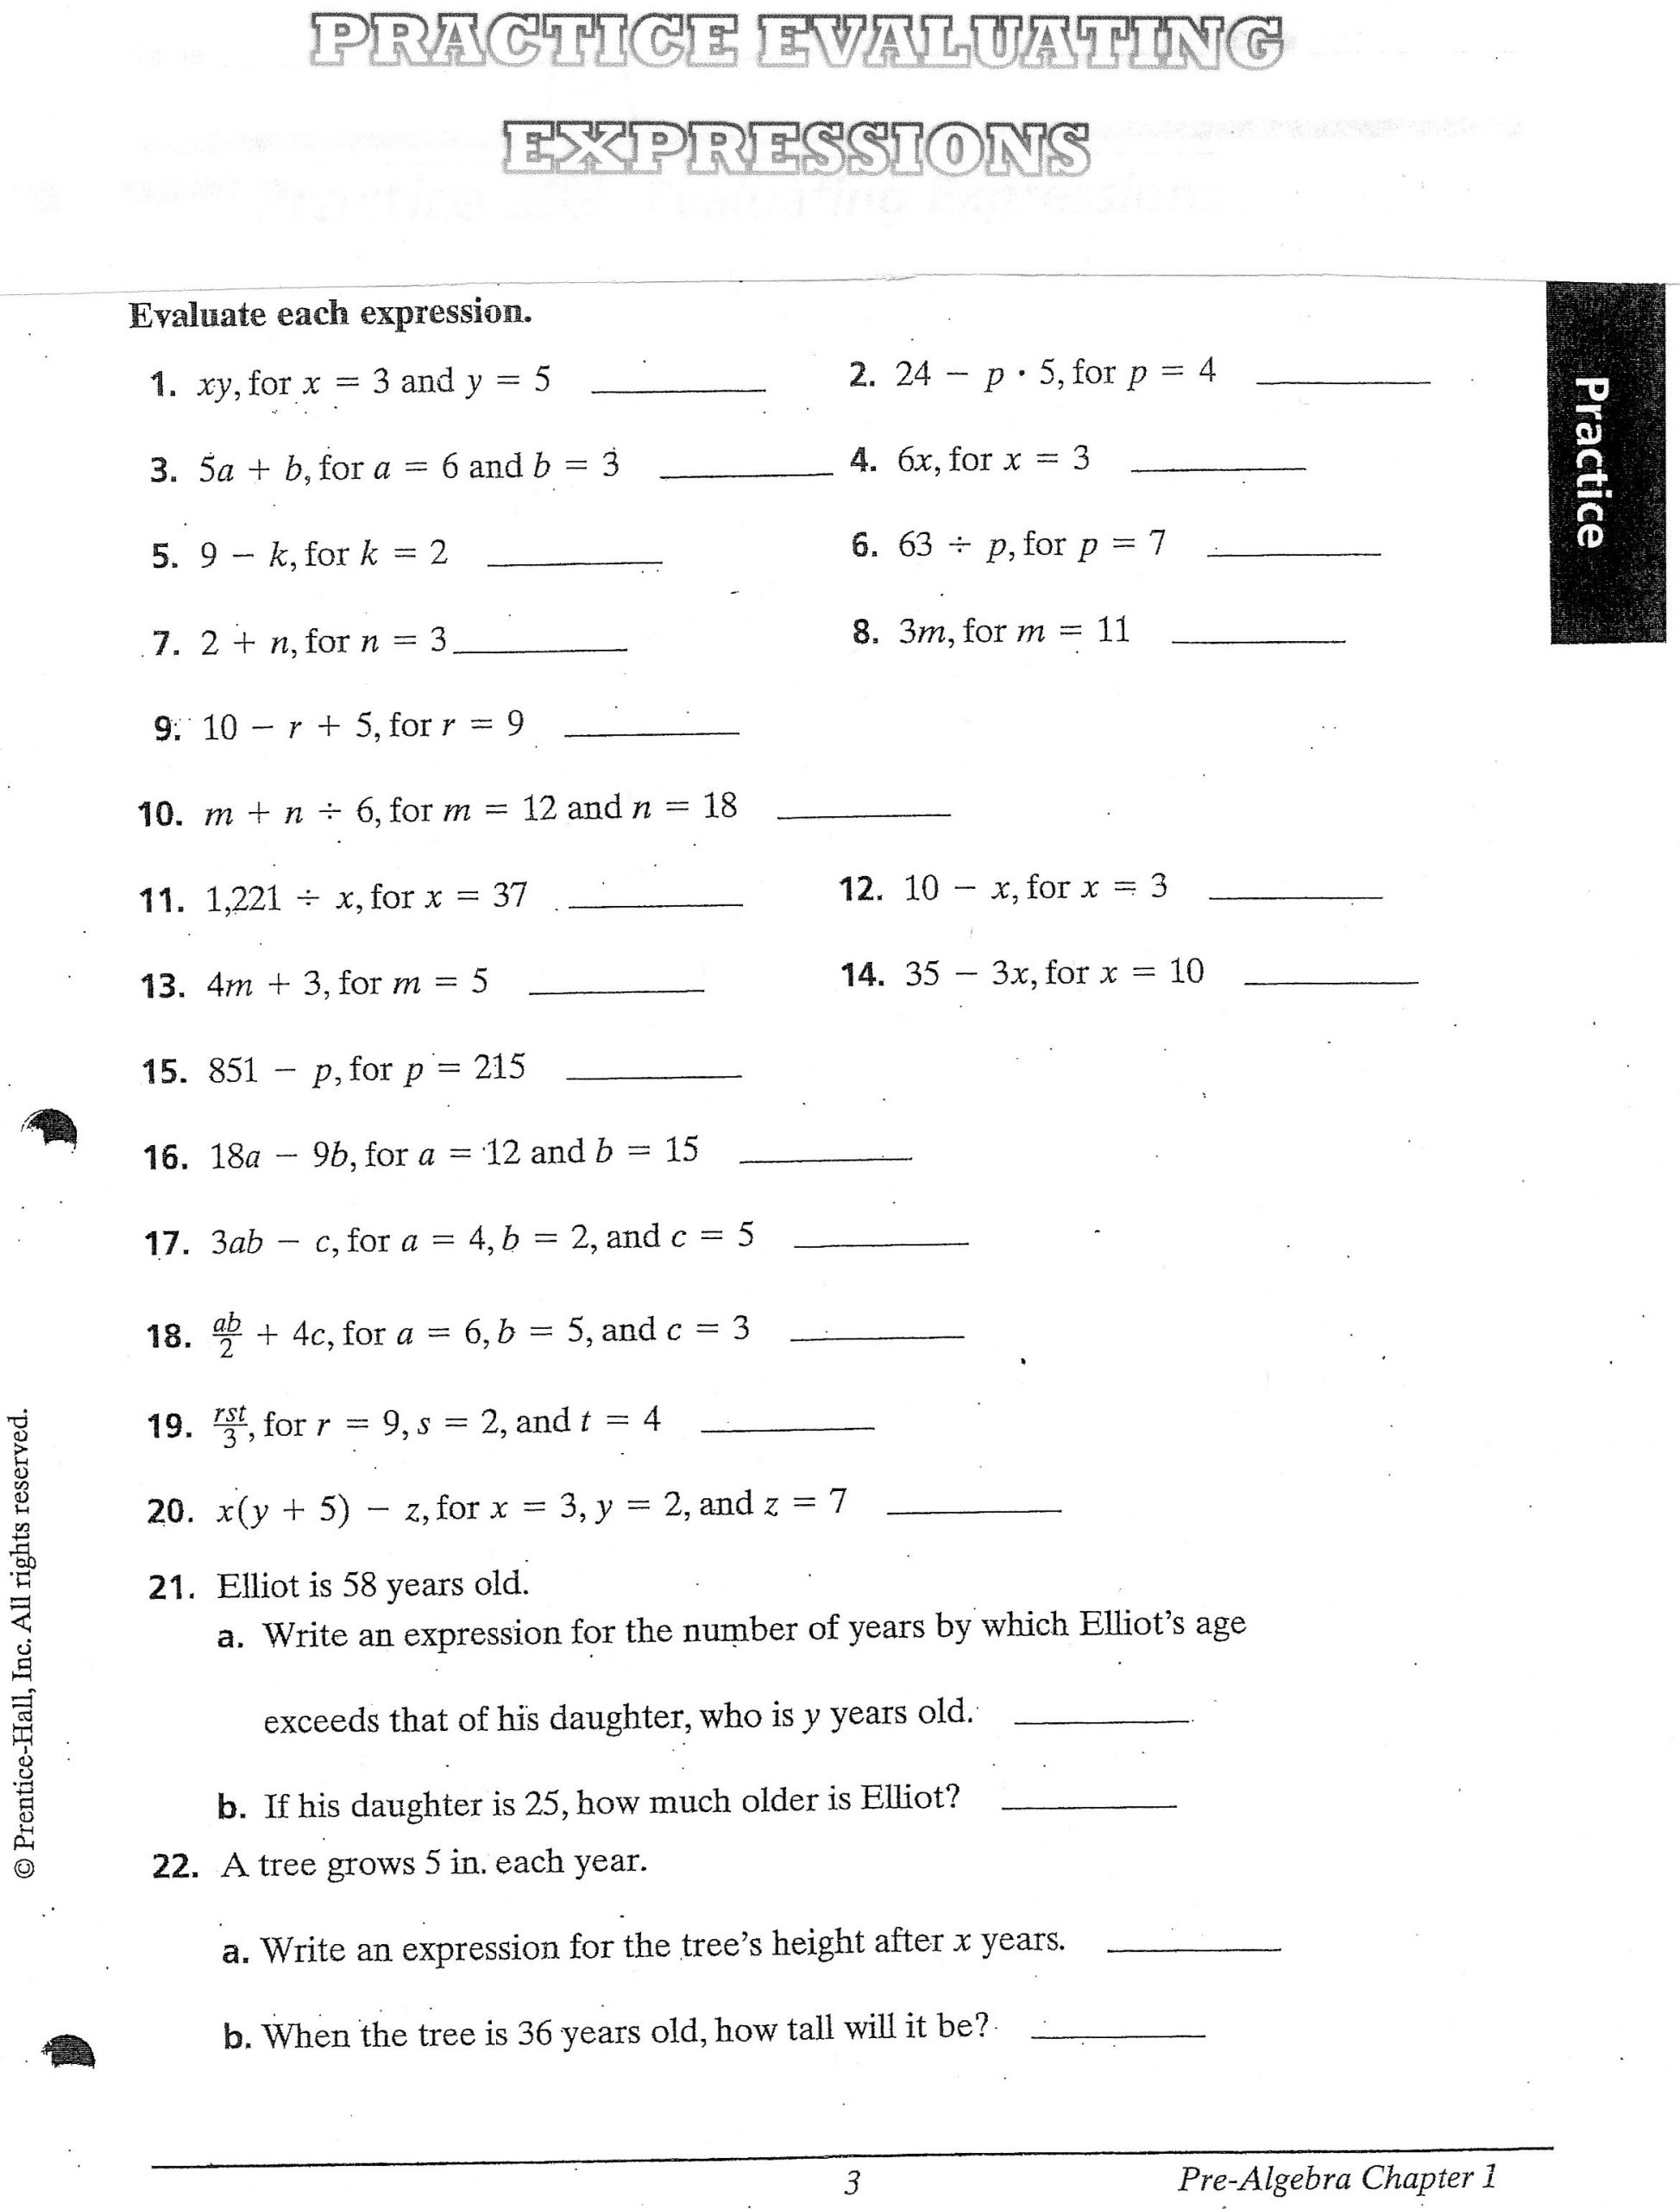 Writing and Evaluating Expressions Worksheet Evaluating Expressions Worksheets 7th Grade